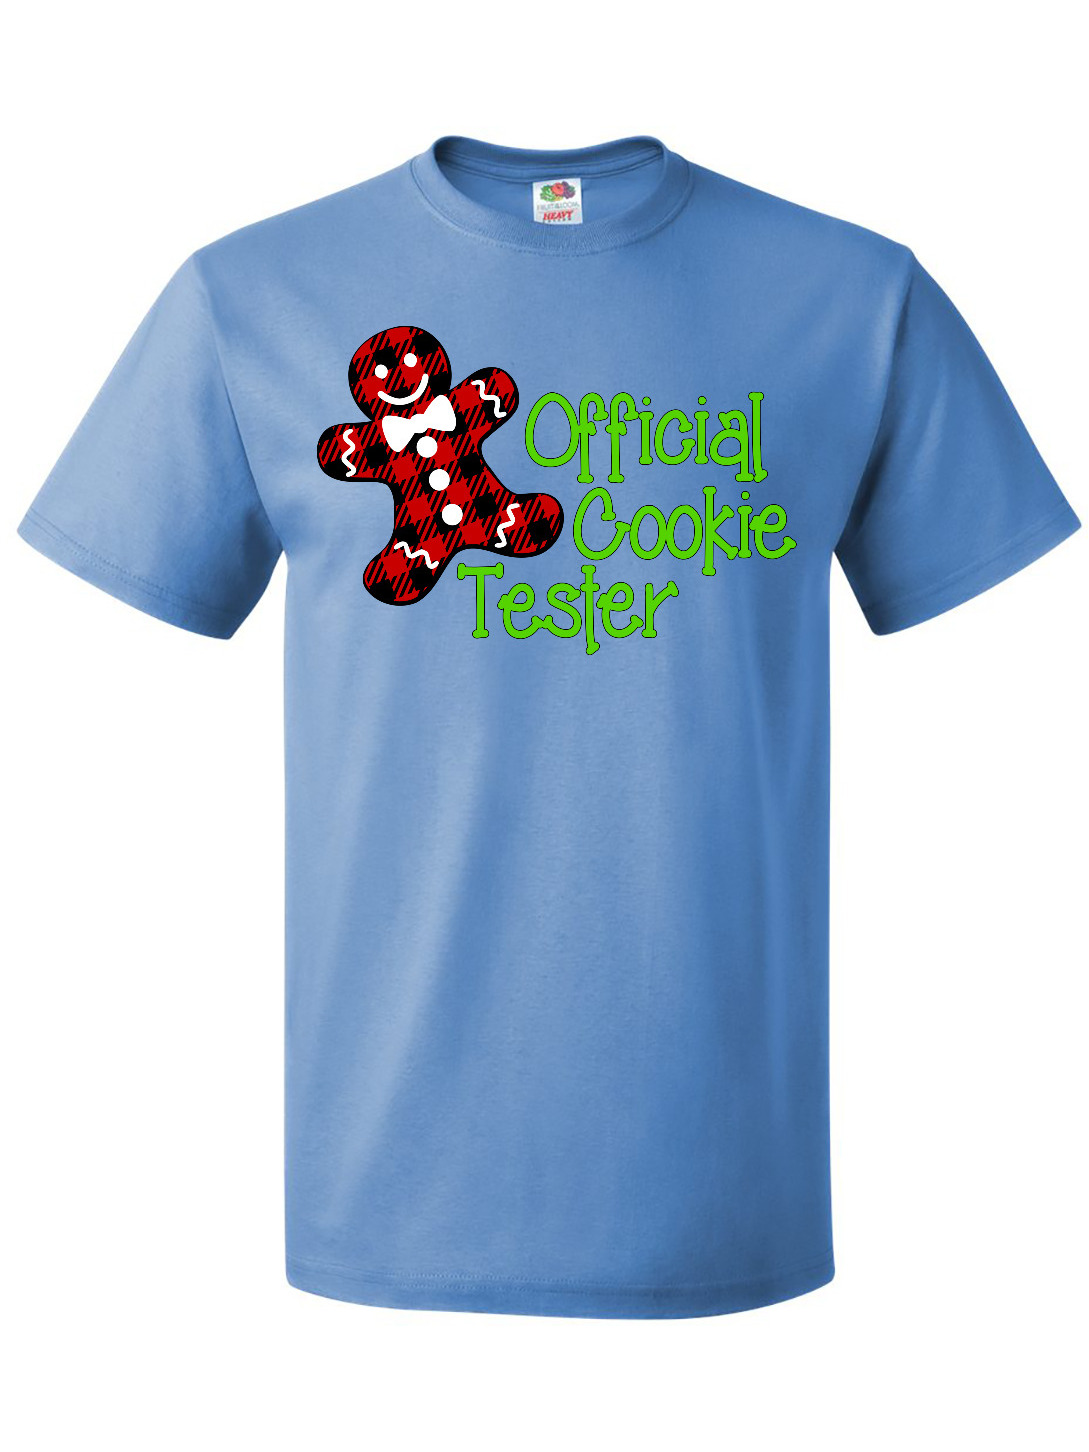 Inktastic Official Cookie Tester Red Plaid Gingerbread Man with Bow Ti T-Shirt - image 1 of 4